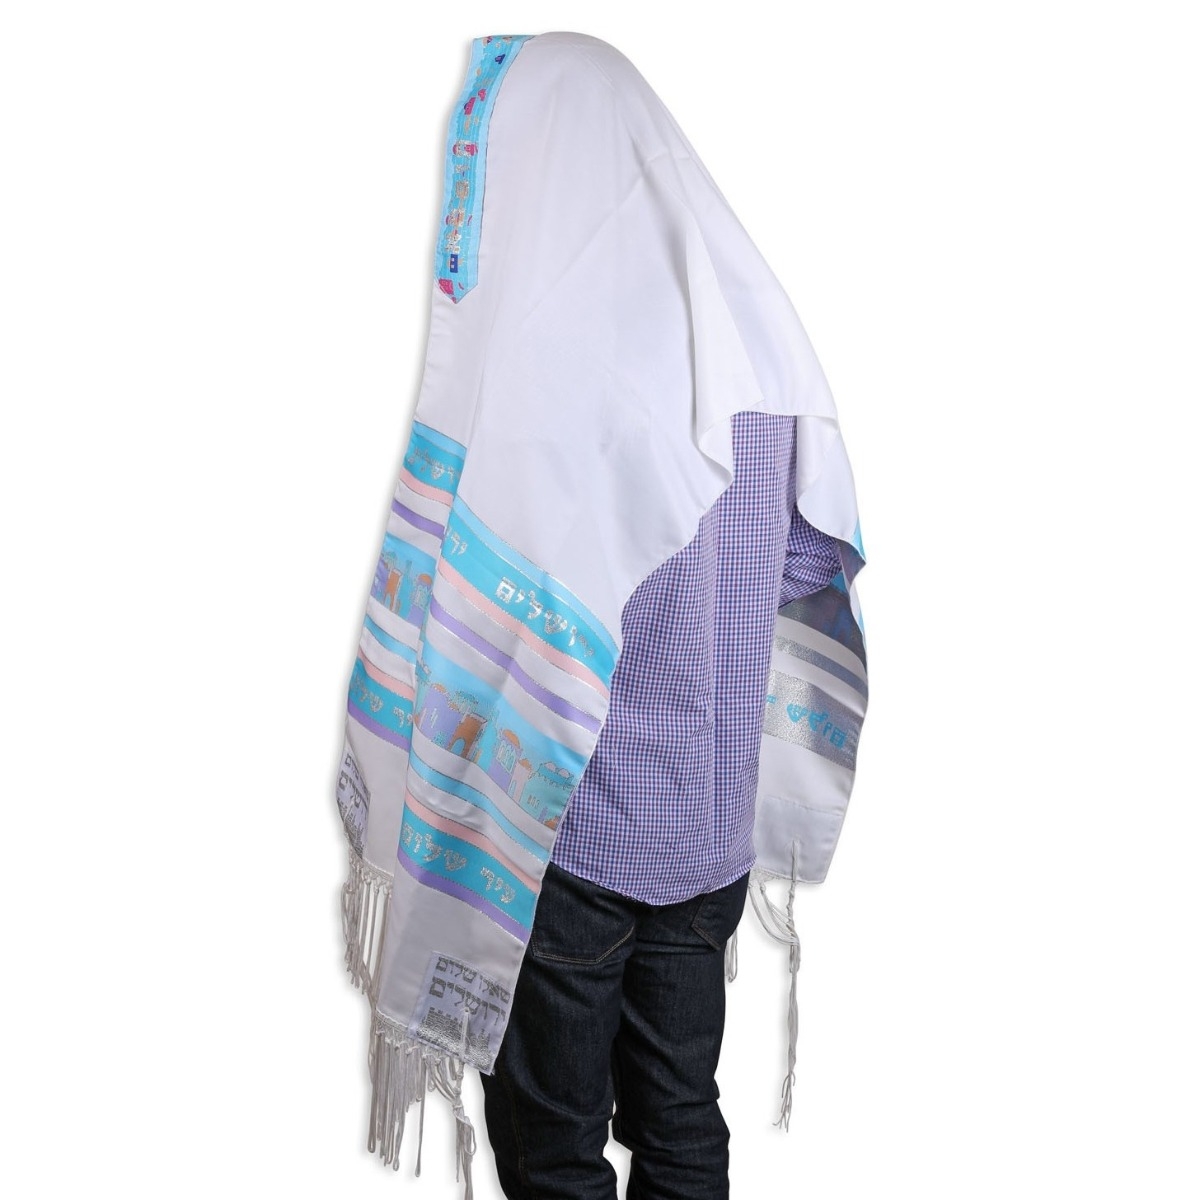 Talitnia Hadar Wool Blend Traditional Tallit Prayer Shawl (Blue and Silver),  Religious Articles